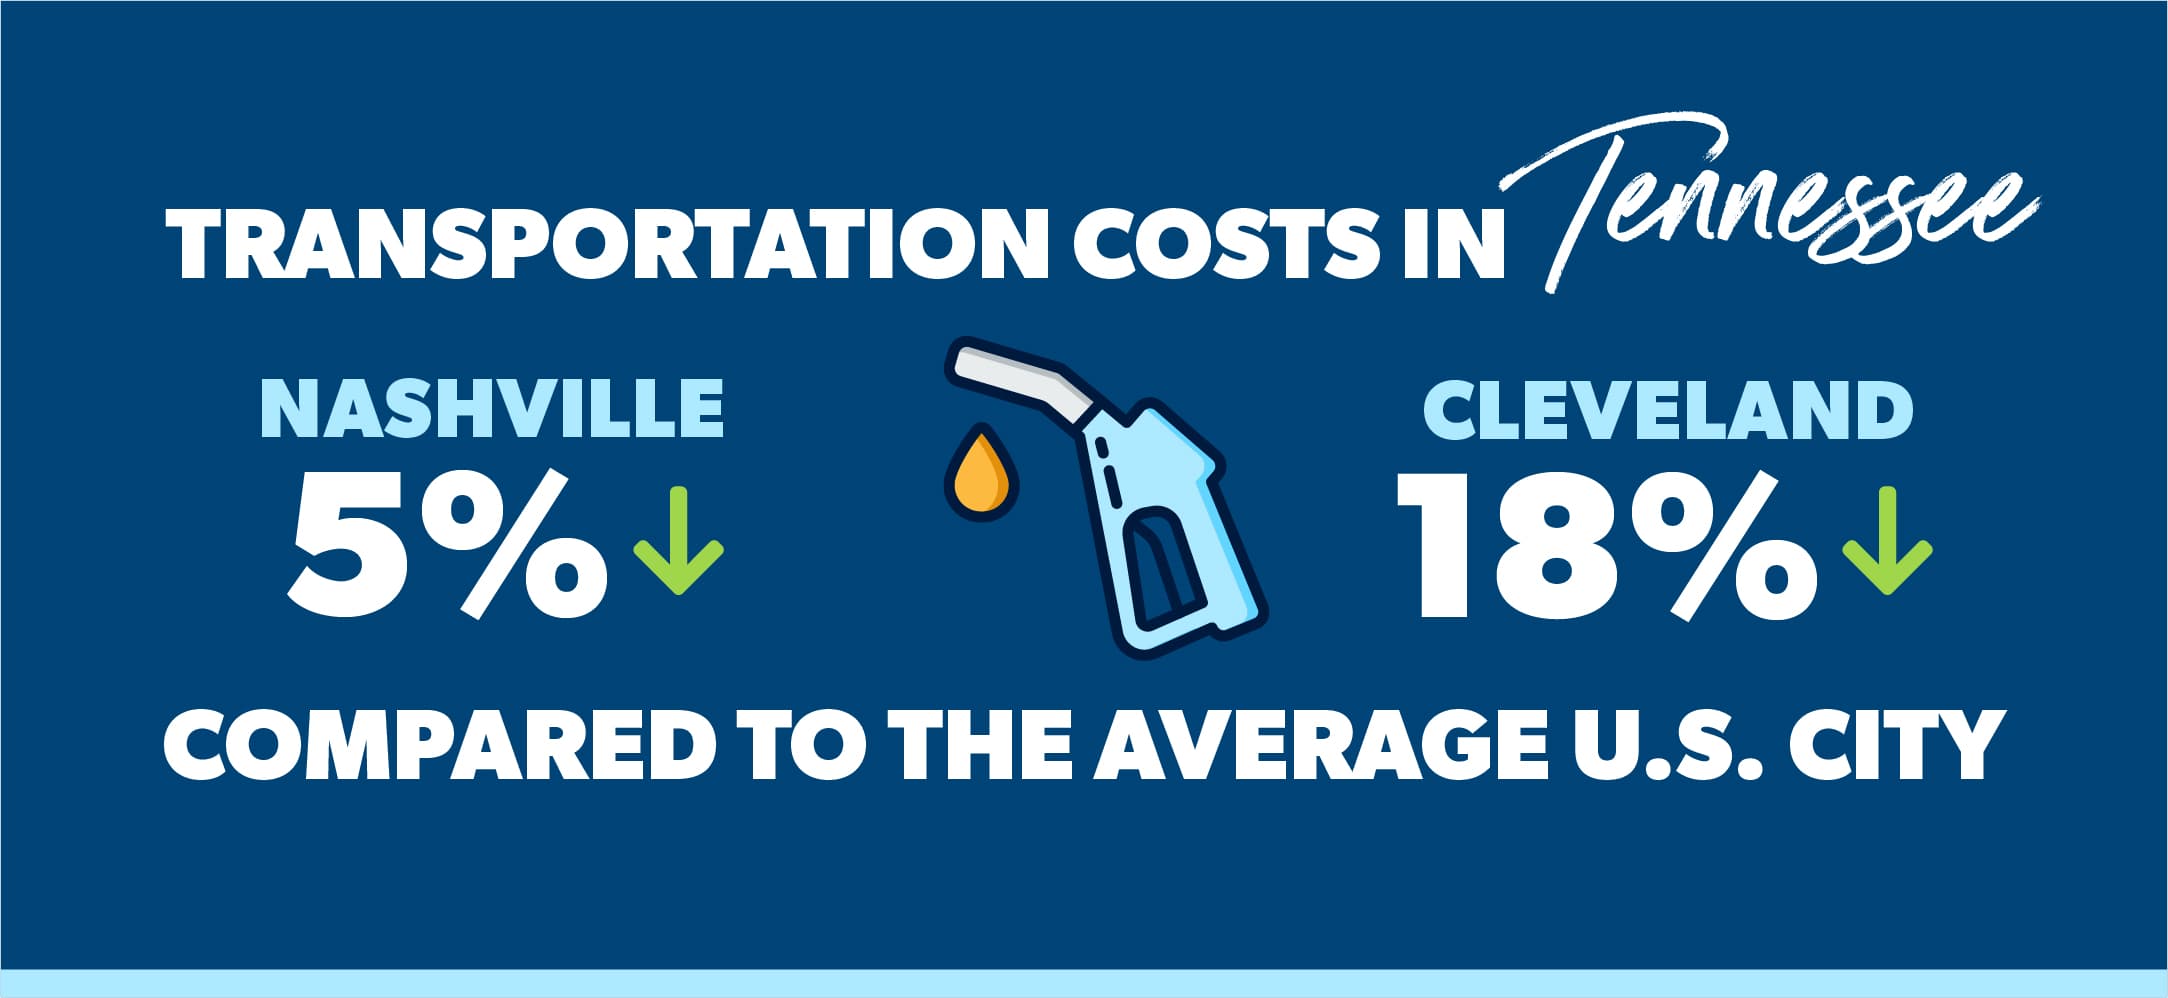 transportation costs in tennessee